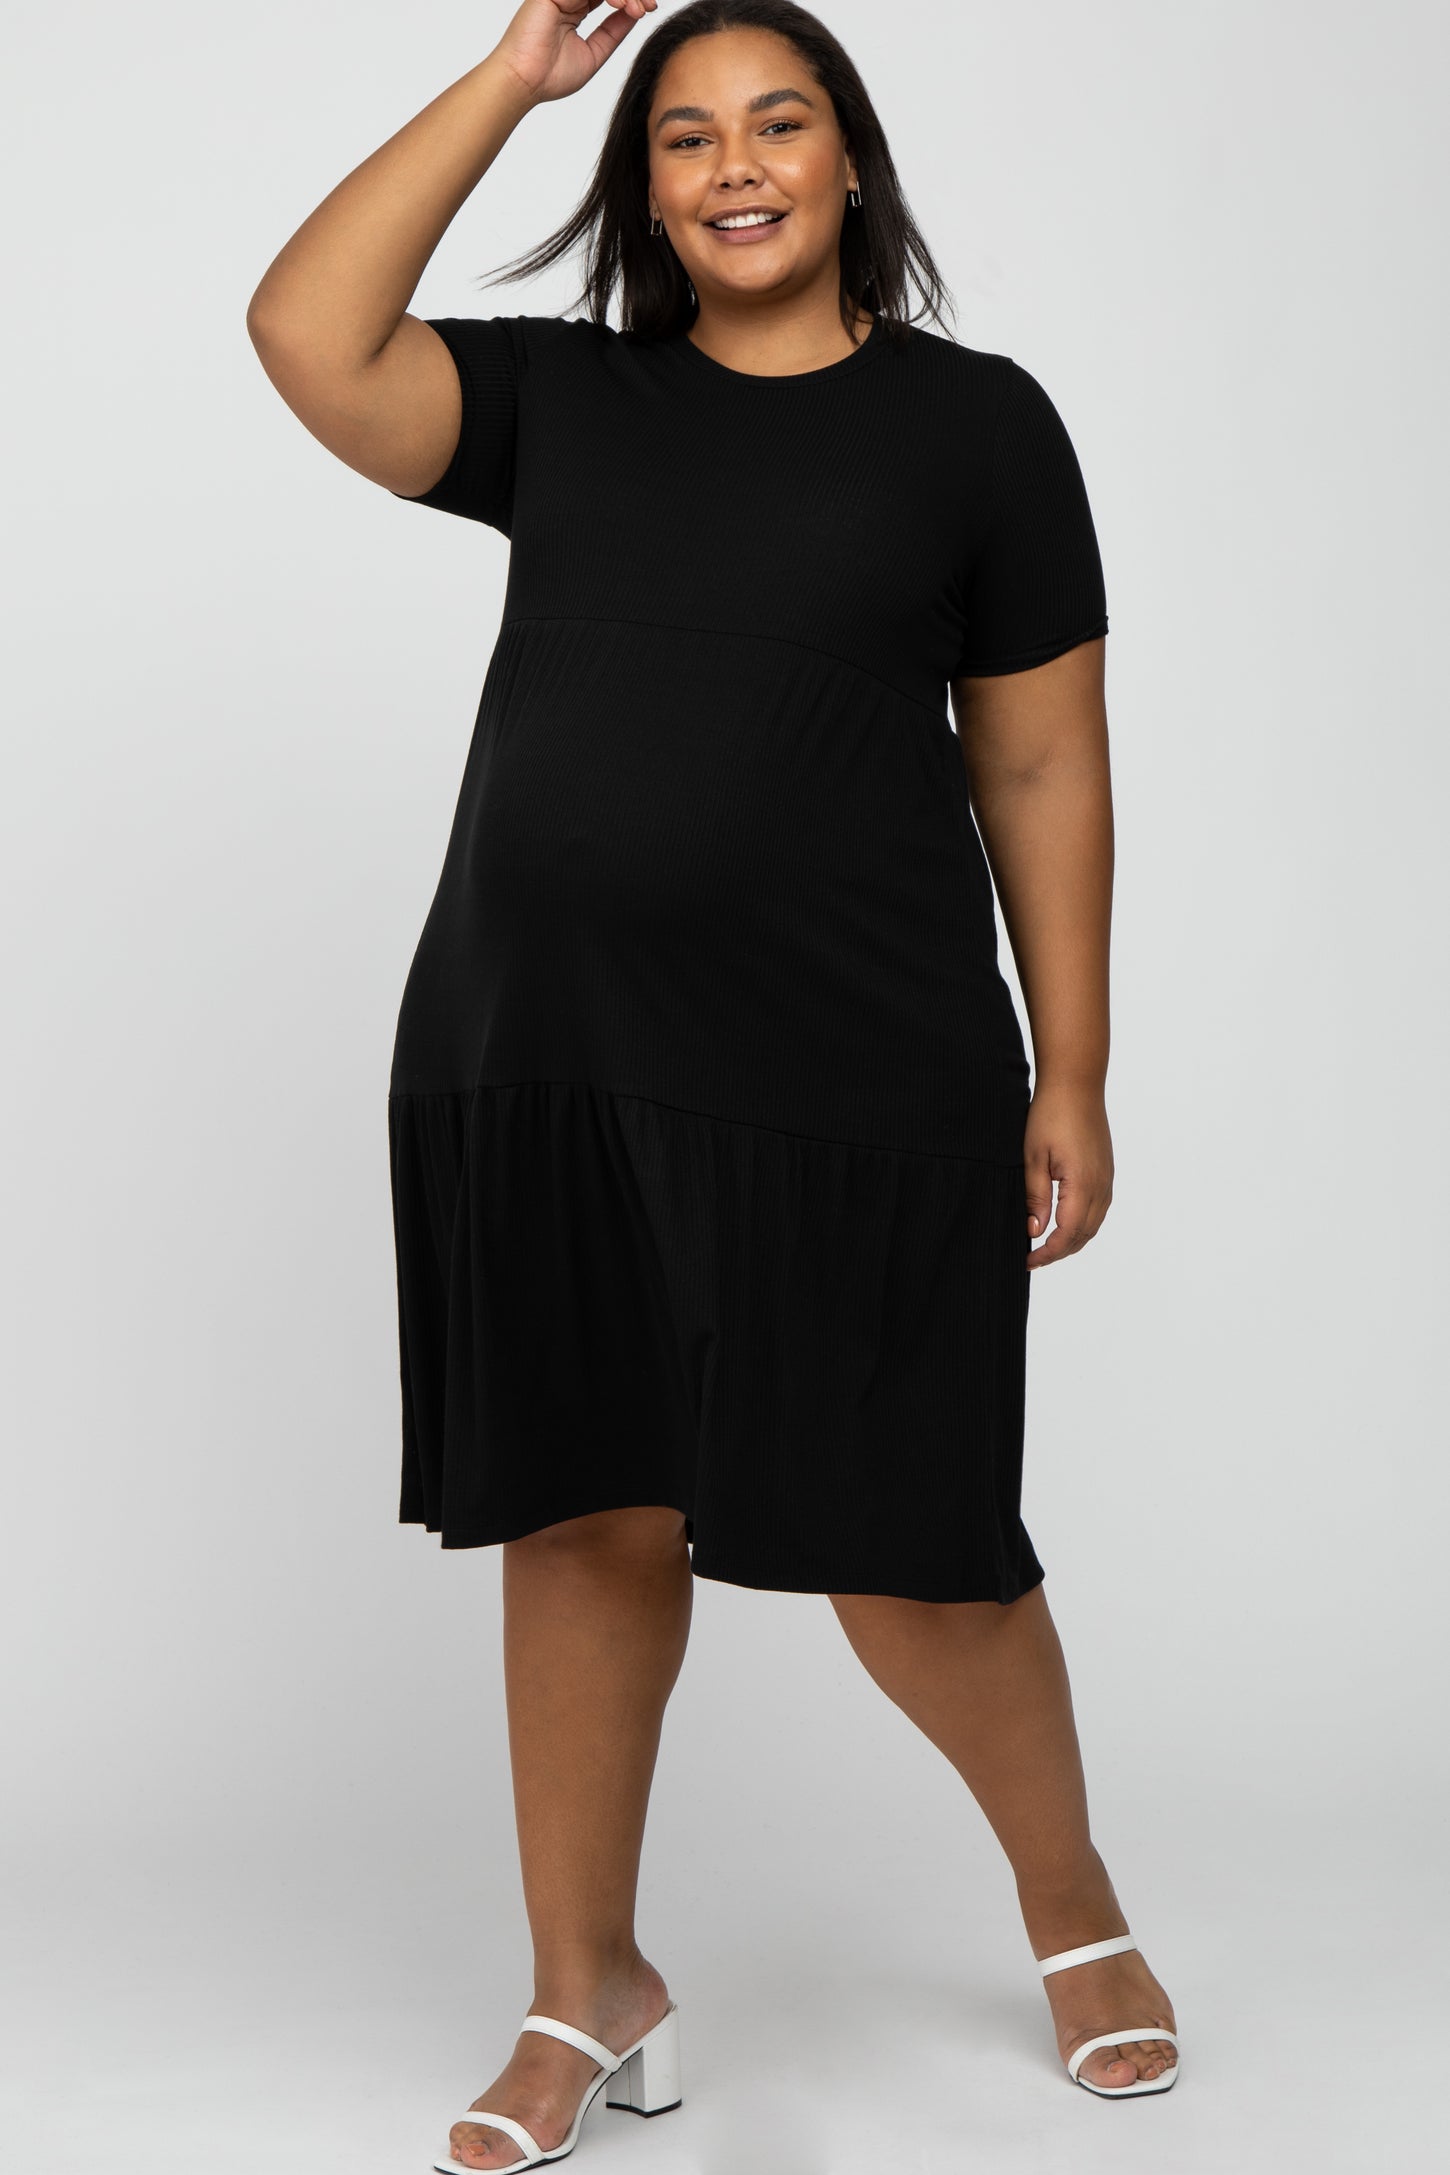 Black Ribbed Tiered Maternity Plus Dress